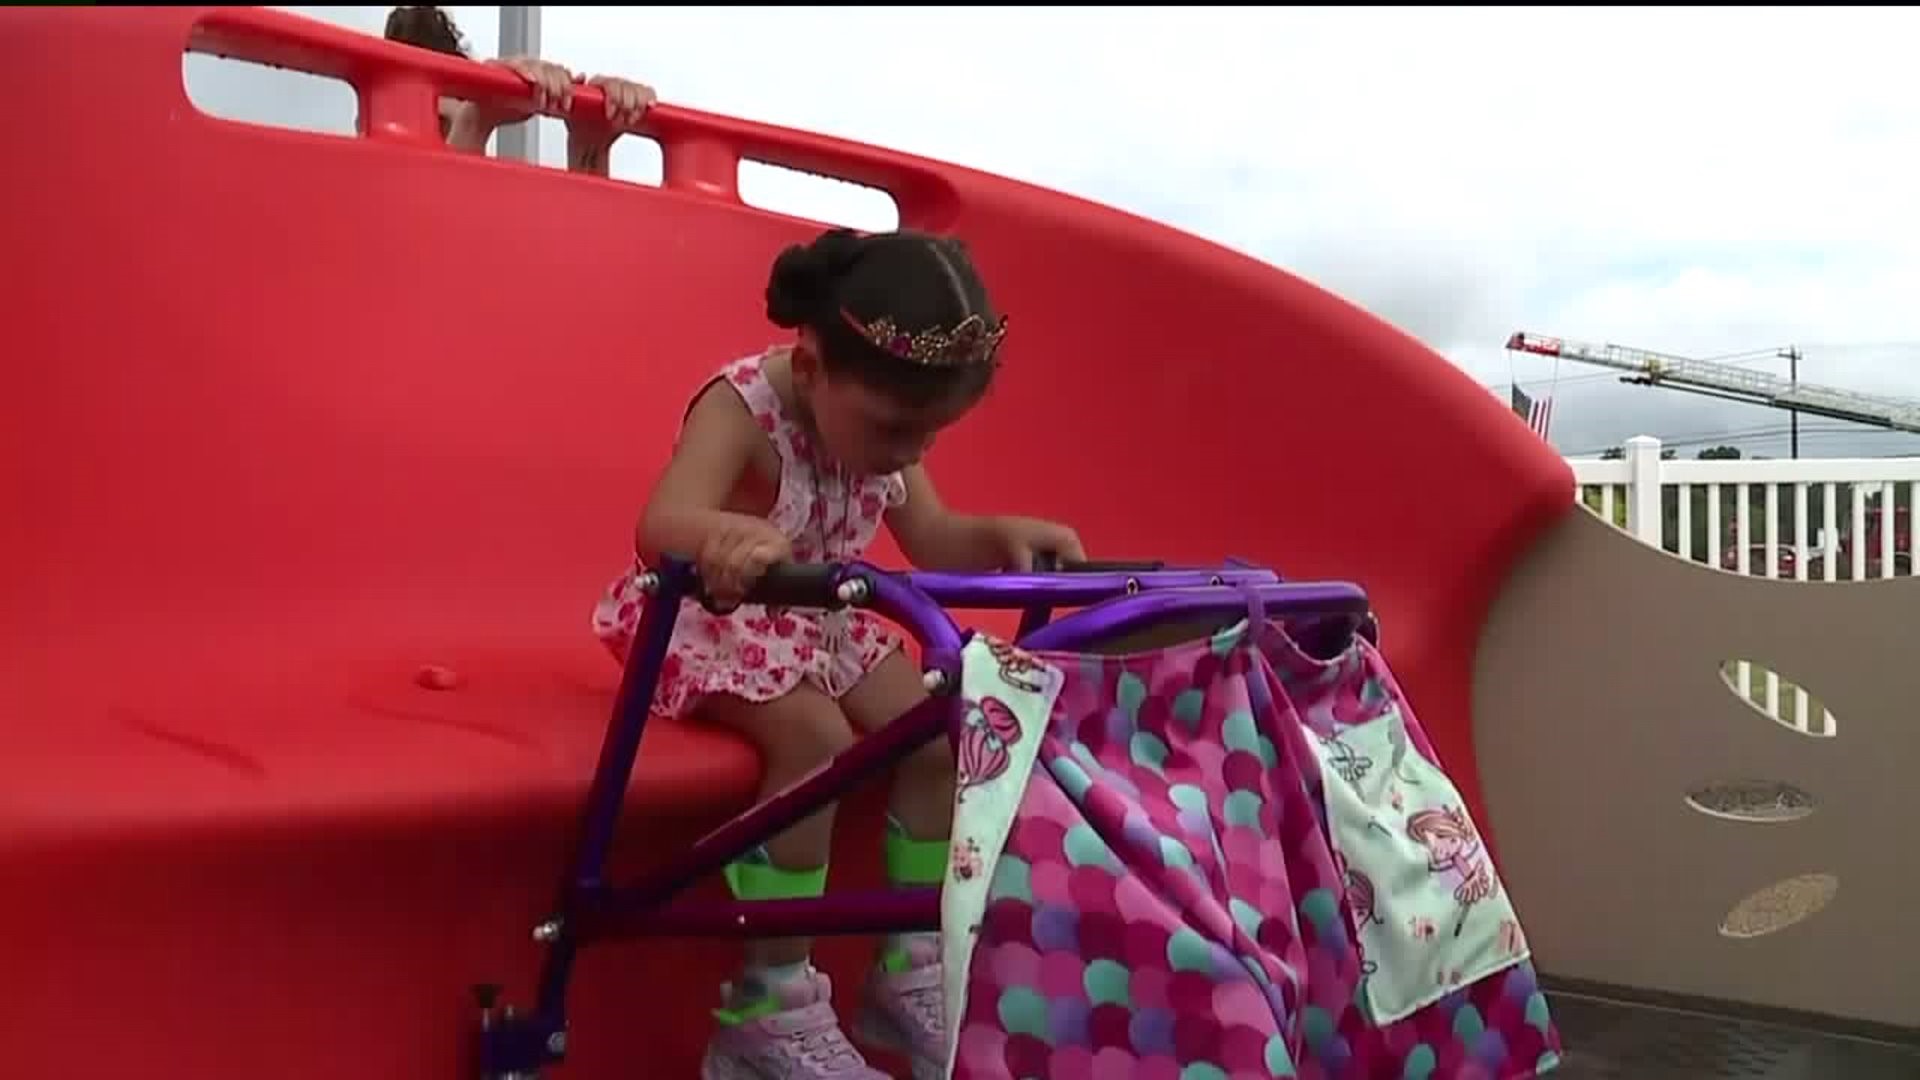 All-Inclusive Playground Opens Near Selinsgrove